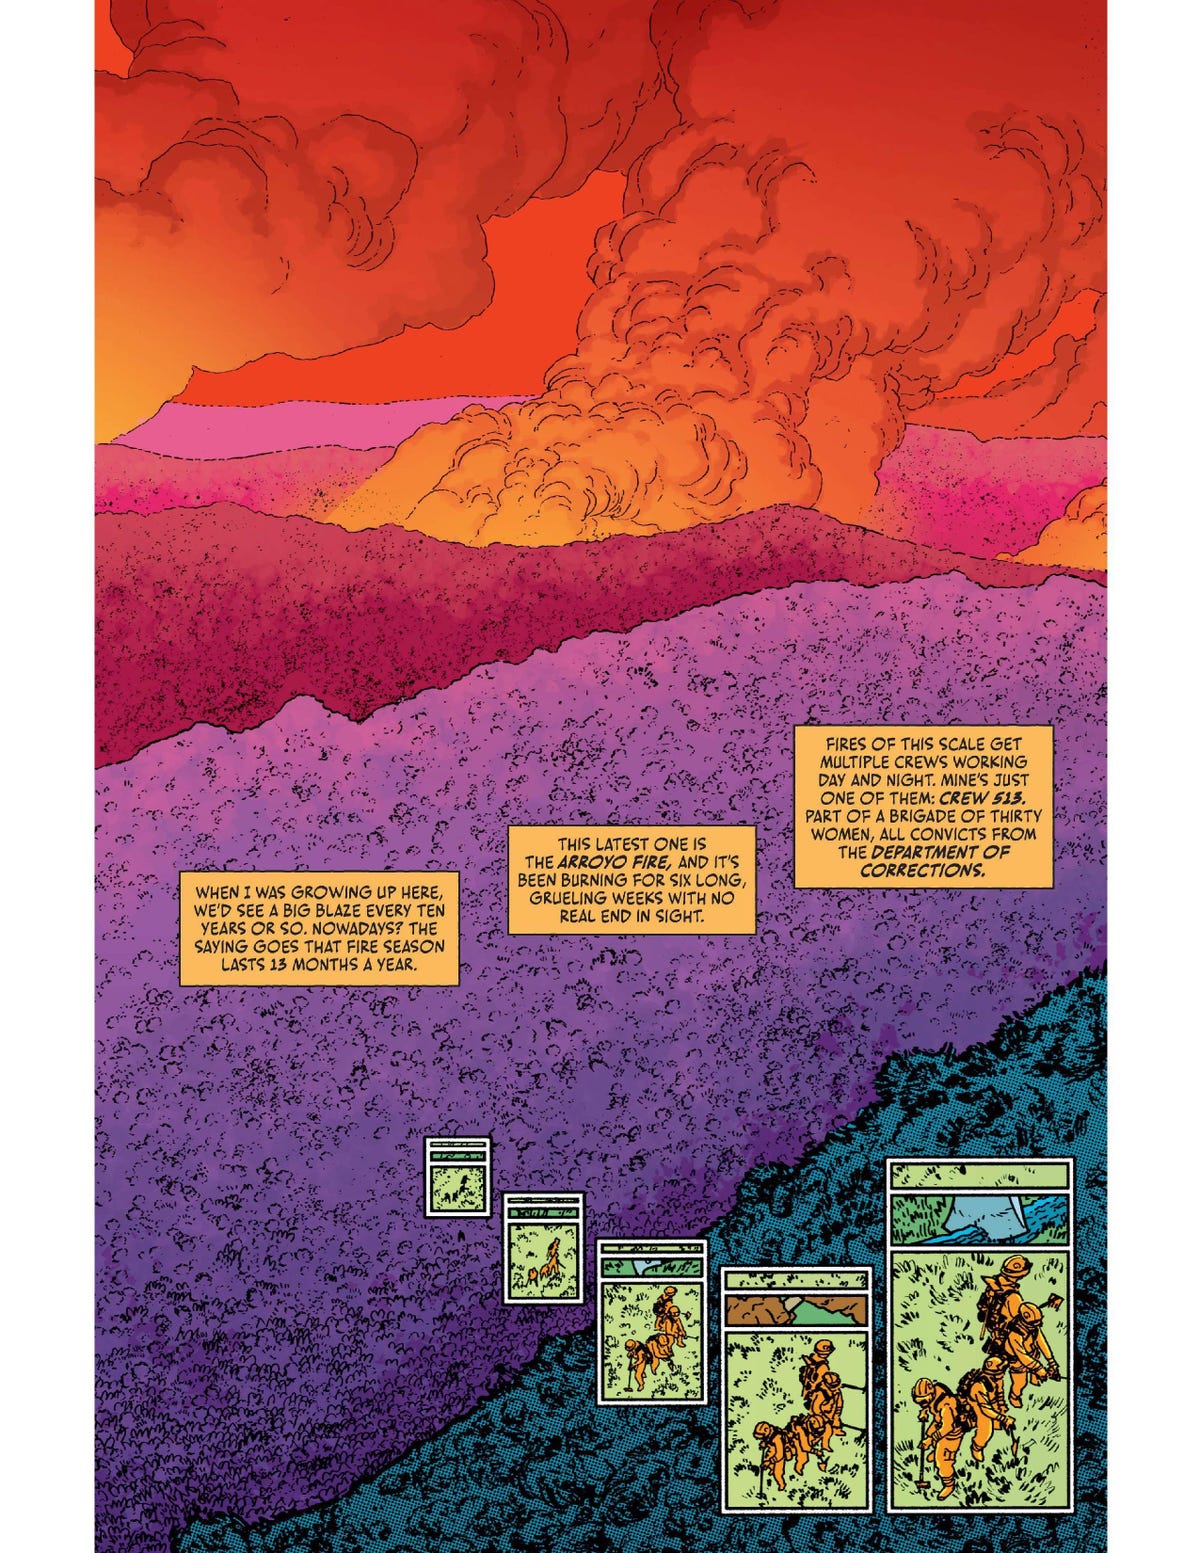 Comic page of wildfire in California mountains